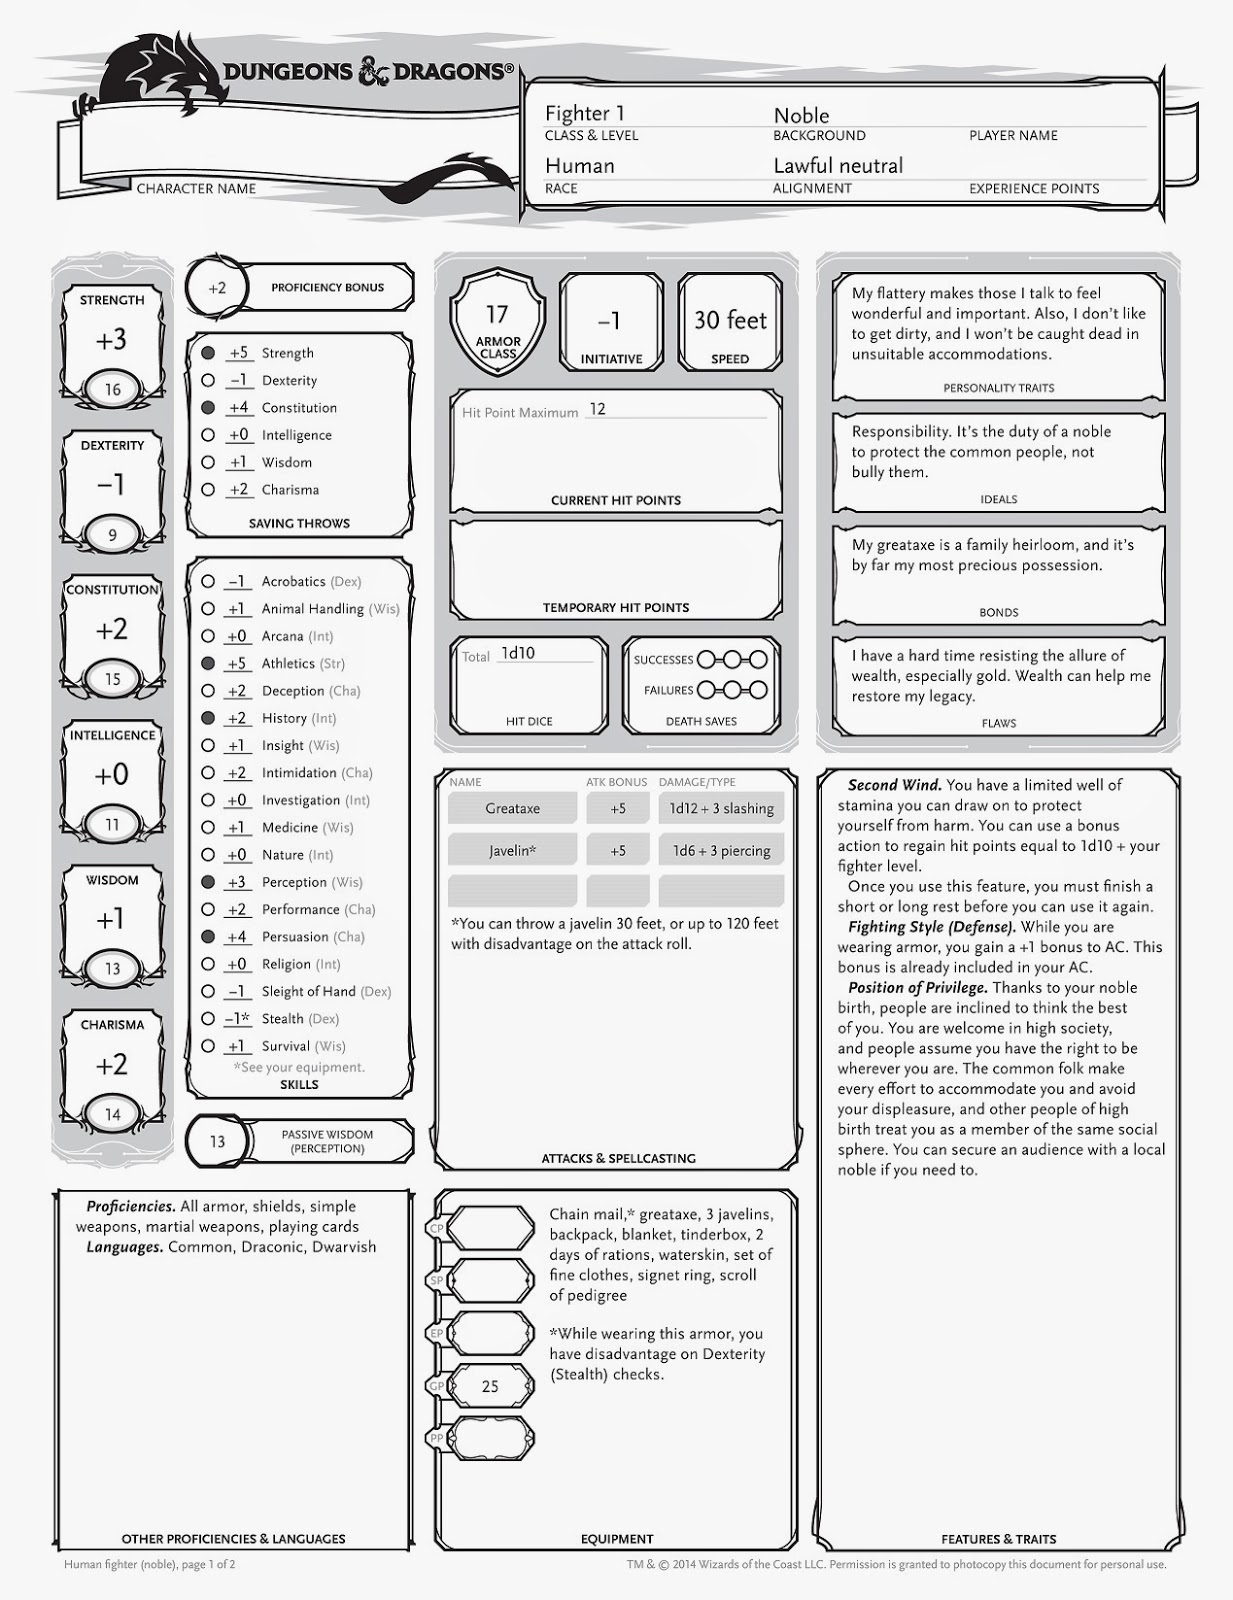 Example Dungeons & Dragons character sheet.